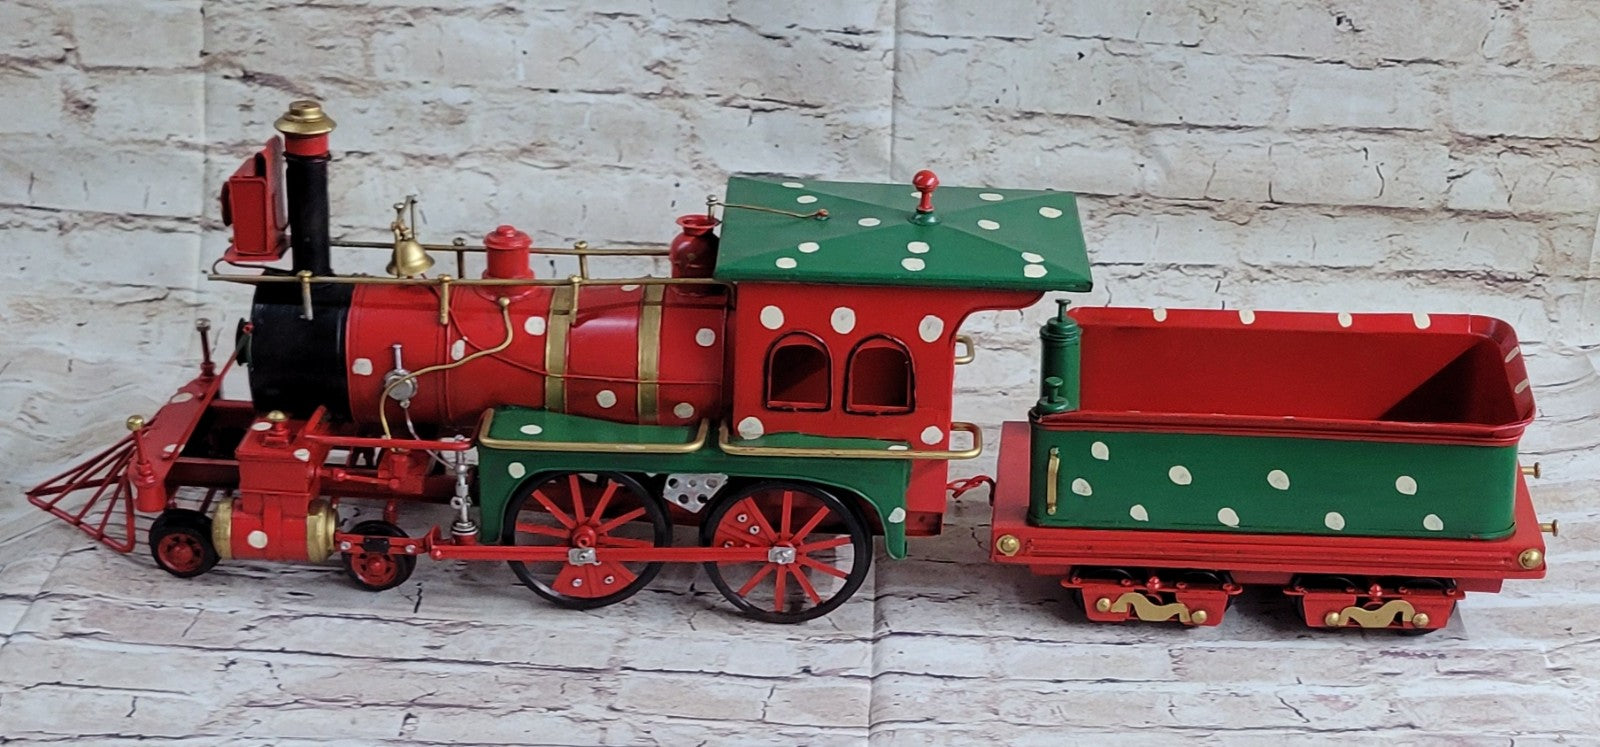 MODERN TOYS : WESTERN SPECIAL LOCOMOTIVE HAND MADE CLASSIC ARTWORK FIGURINE FOR COLLECTOR